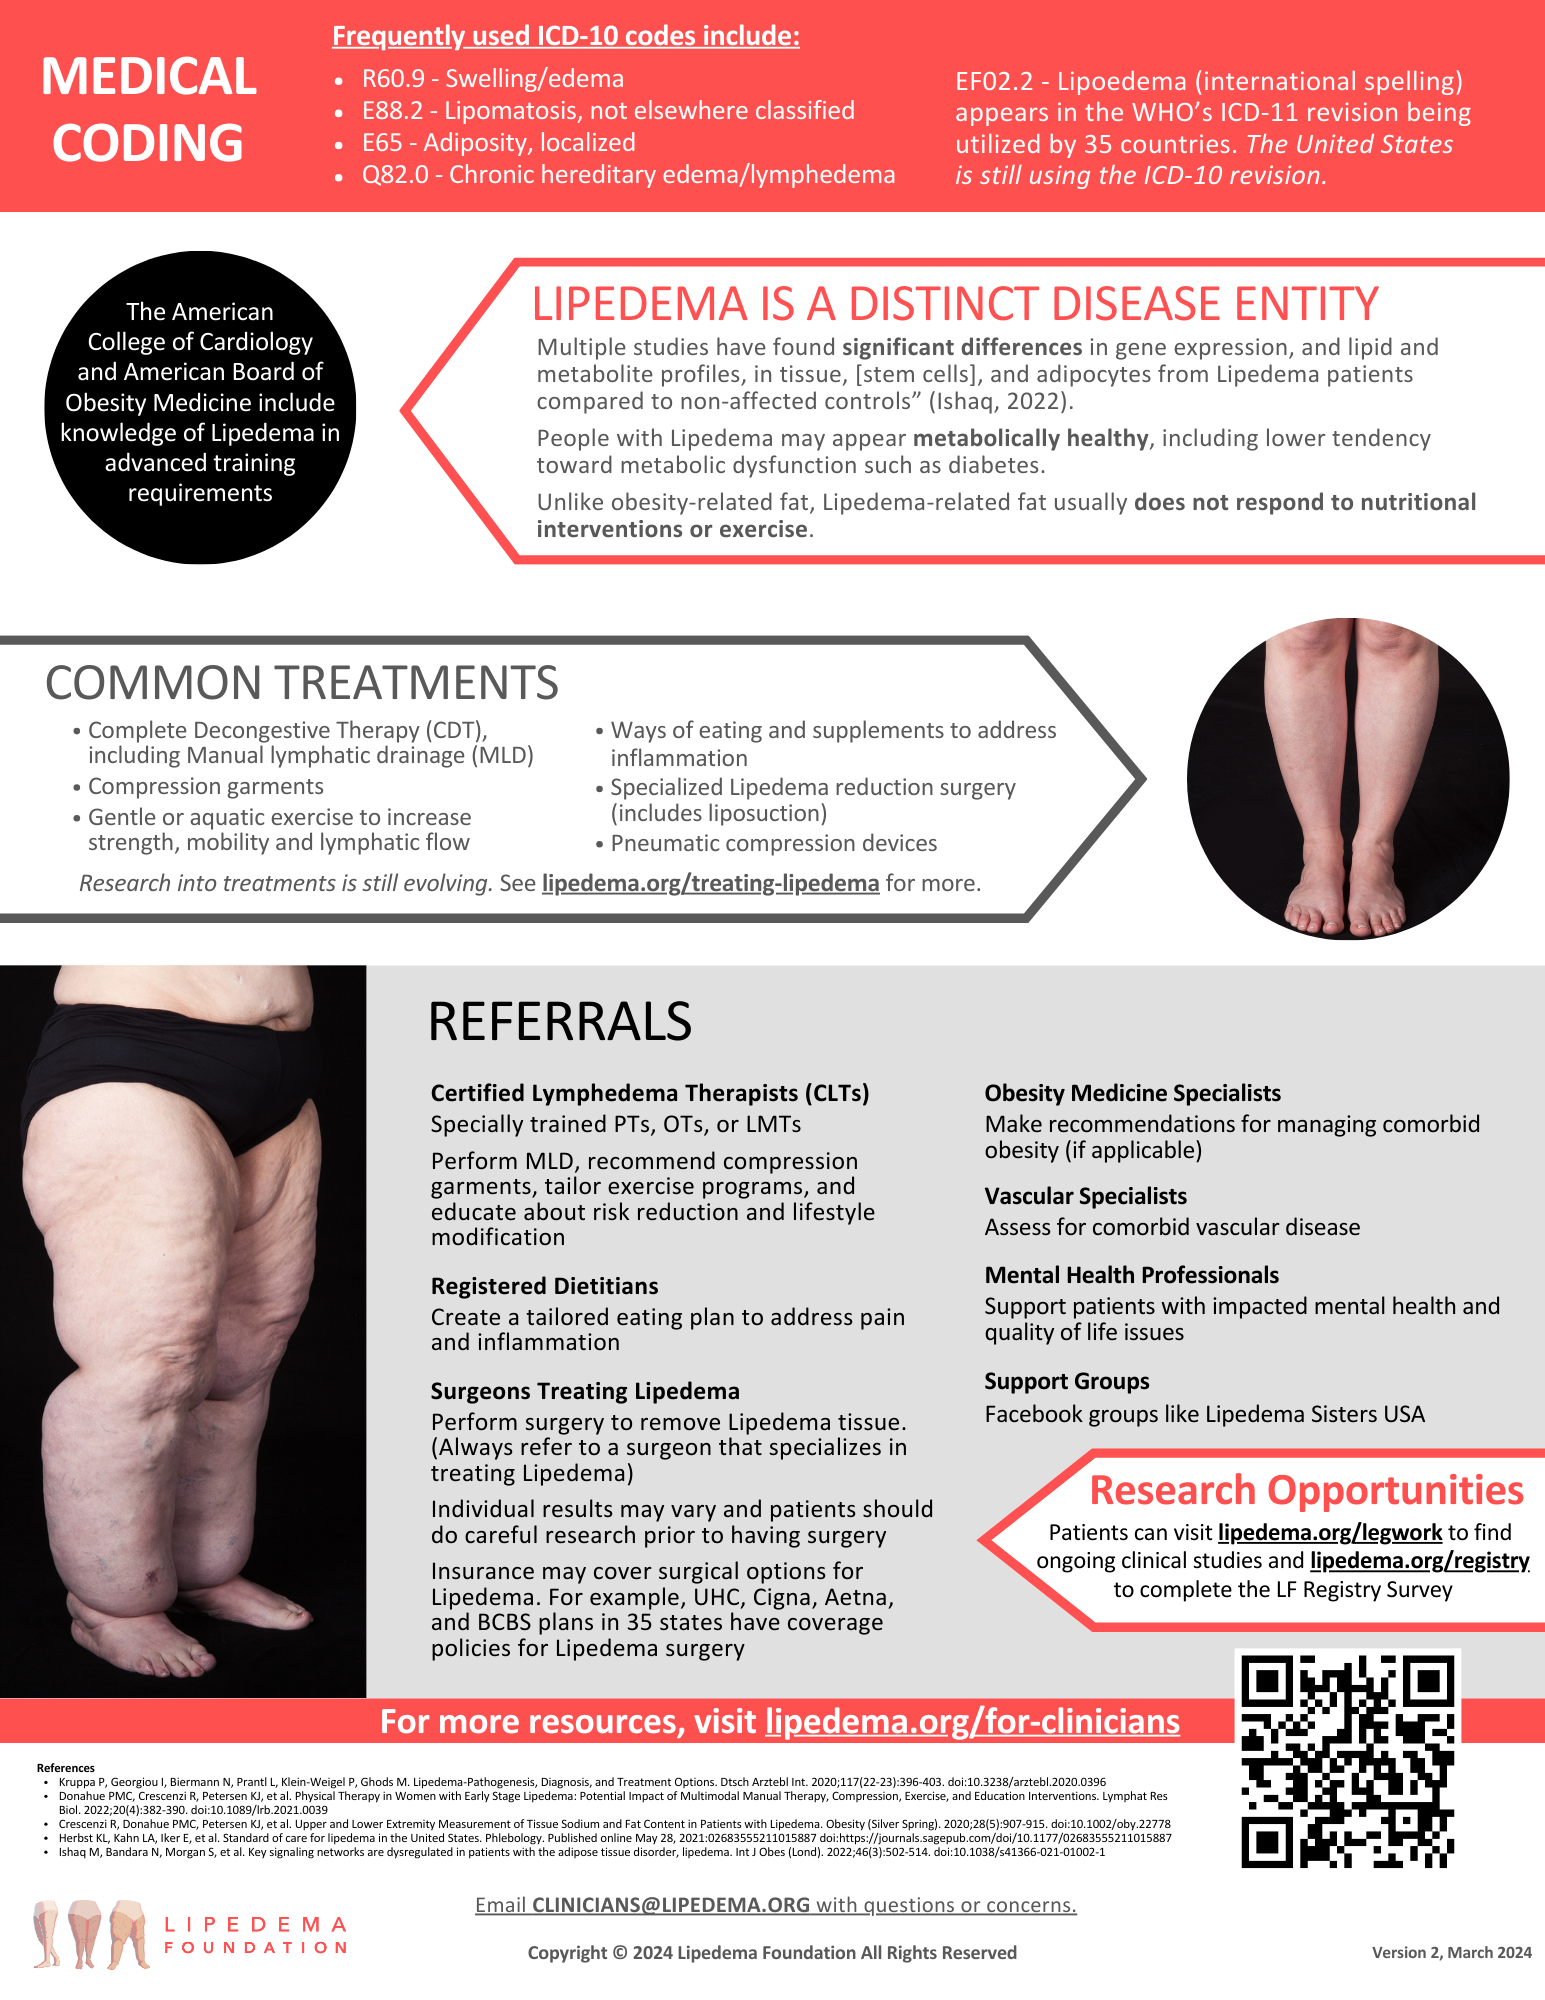 Lipedema Treatment Network – Connect with qualified providers for  state-of-the-art, gentle and effective Lipedema treatment